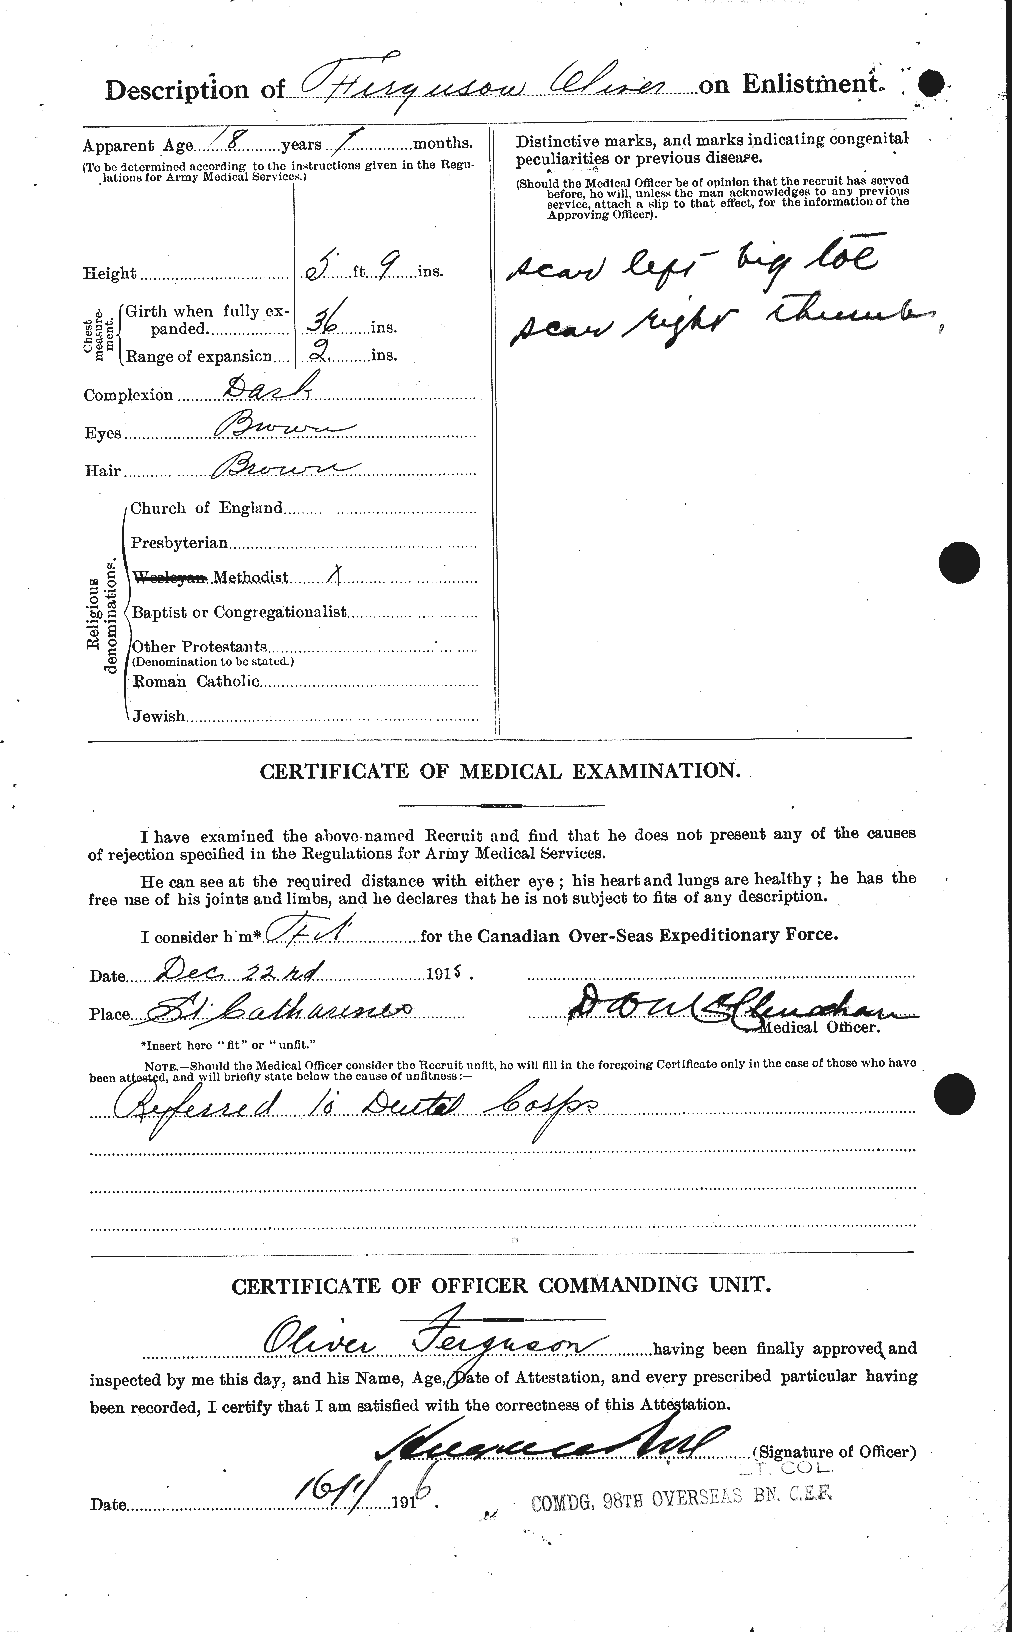 Personnel Records of the First World War - CEF 321197b